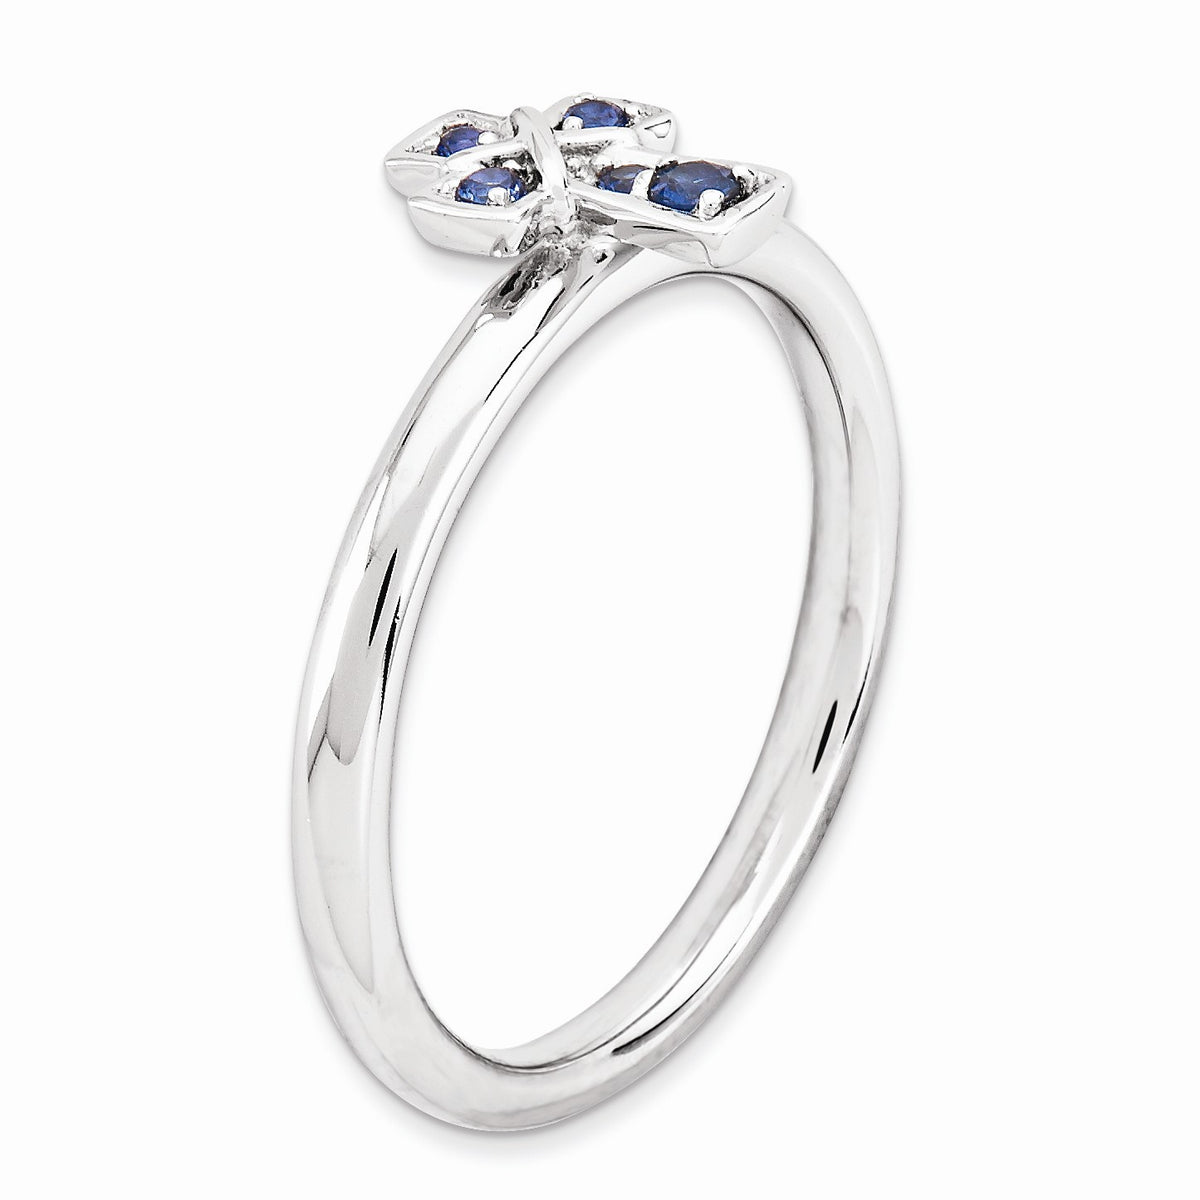 Alternate view of the Rhodium Sterling Silver Stackable Created Sapphire 9mm Cross Ring by The Black Bow Jewelry Co.